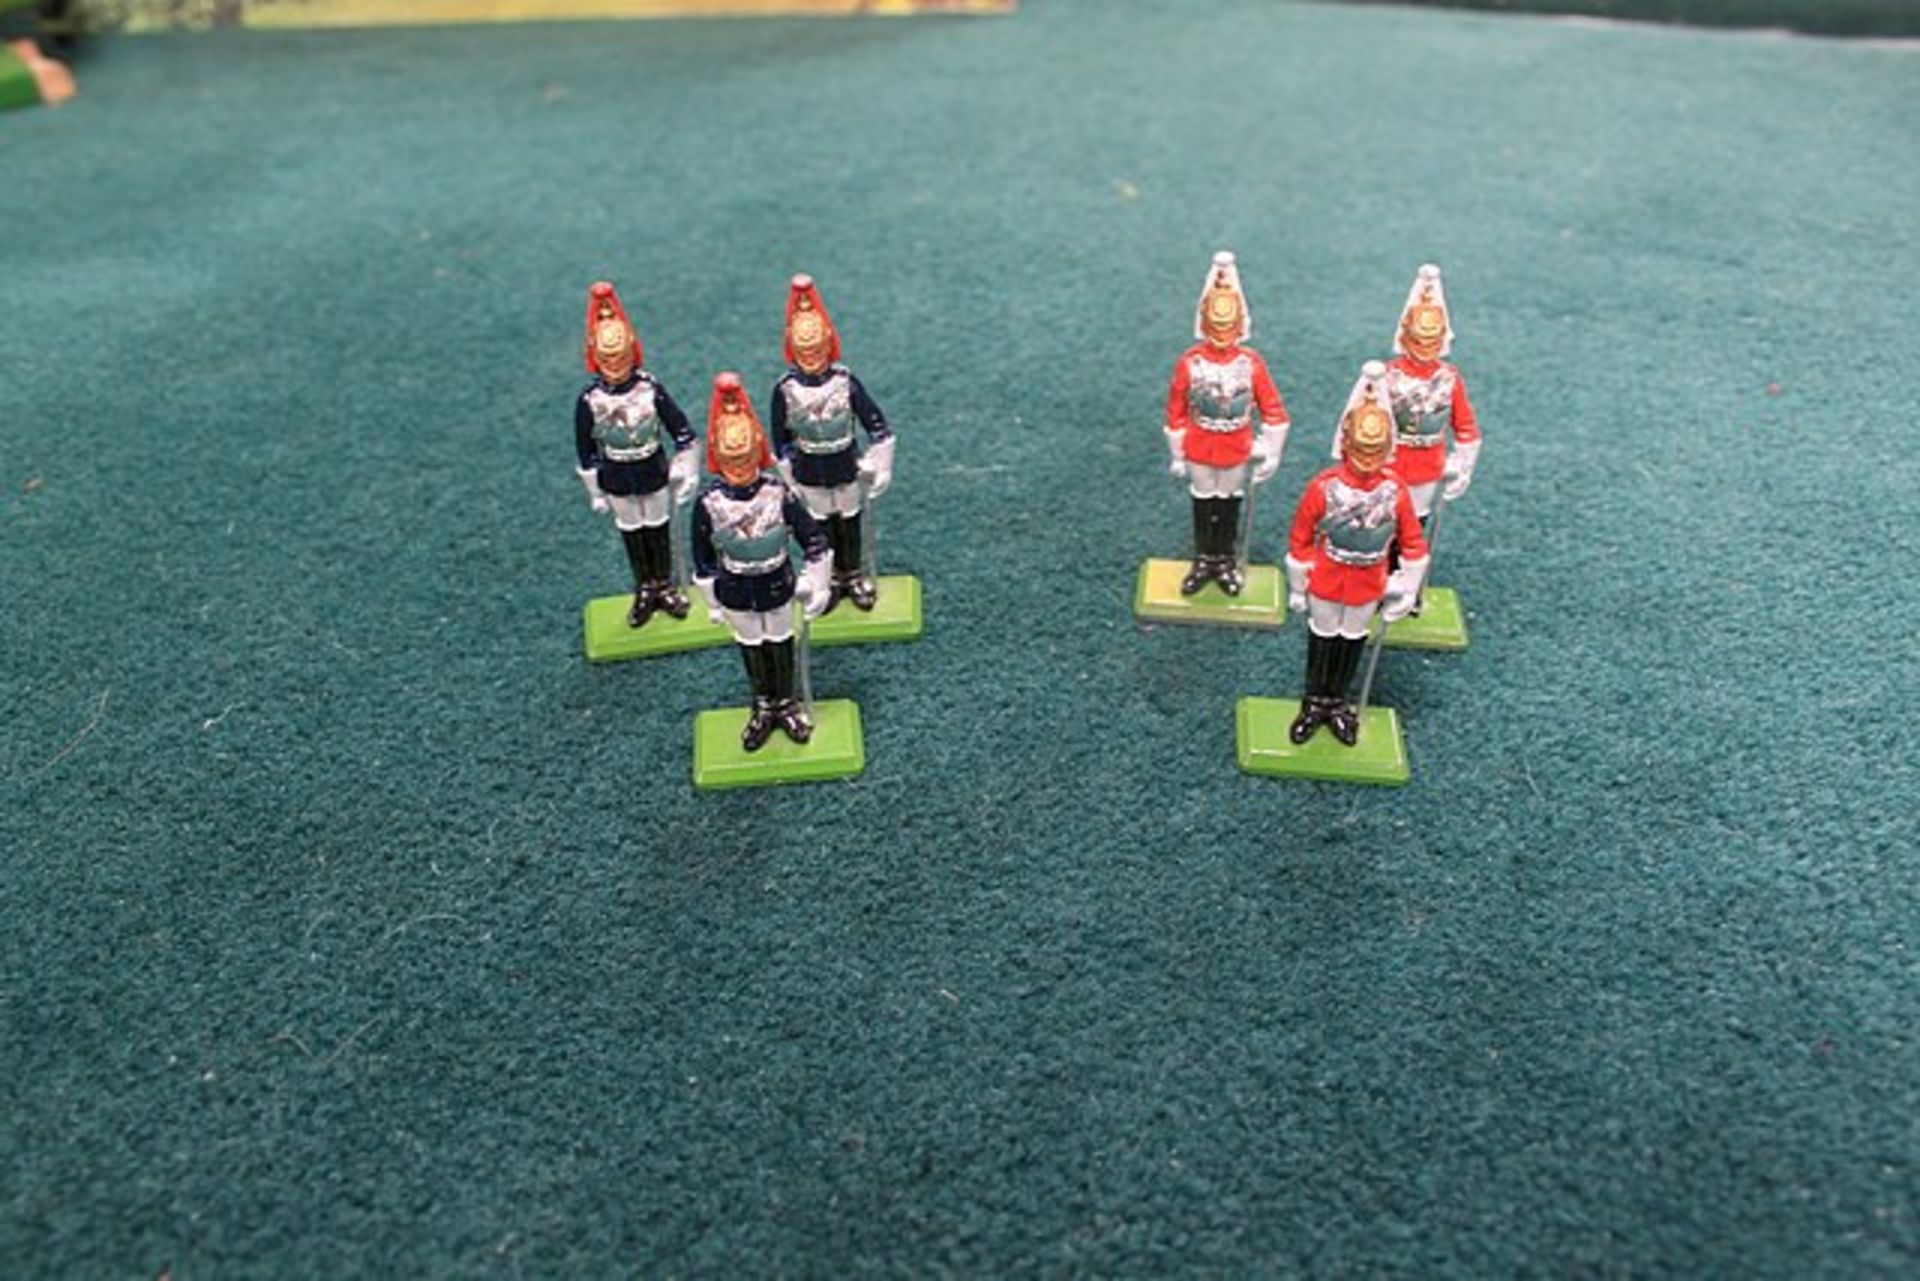 6 x Britains Toy Soldiers Comprising 3 x Britains Queens Guards In Red & 3 x Britains Queens - Image 2 of 2